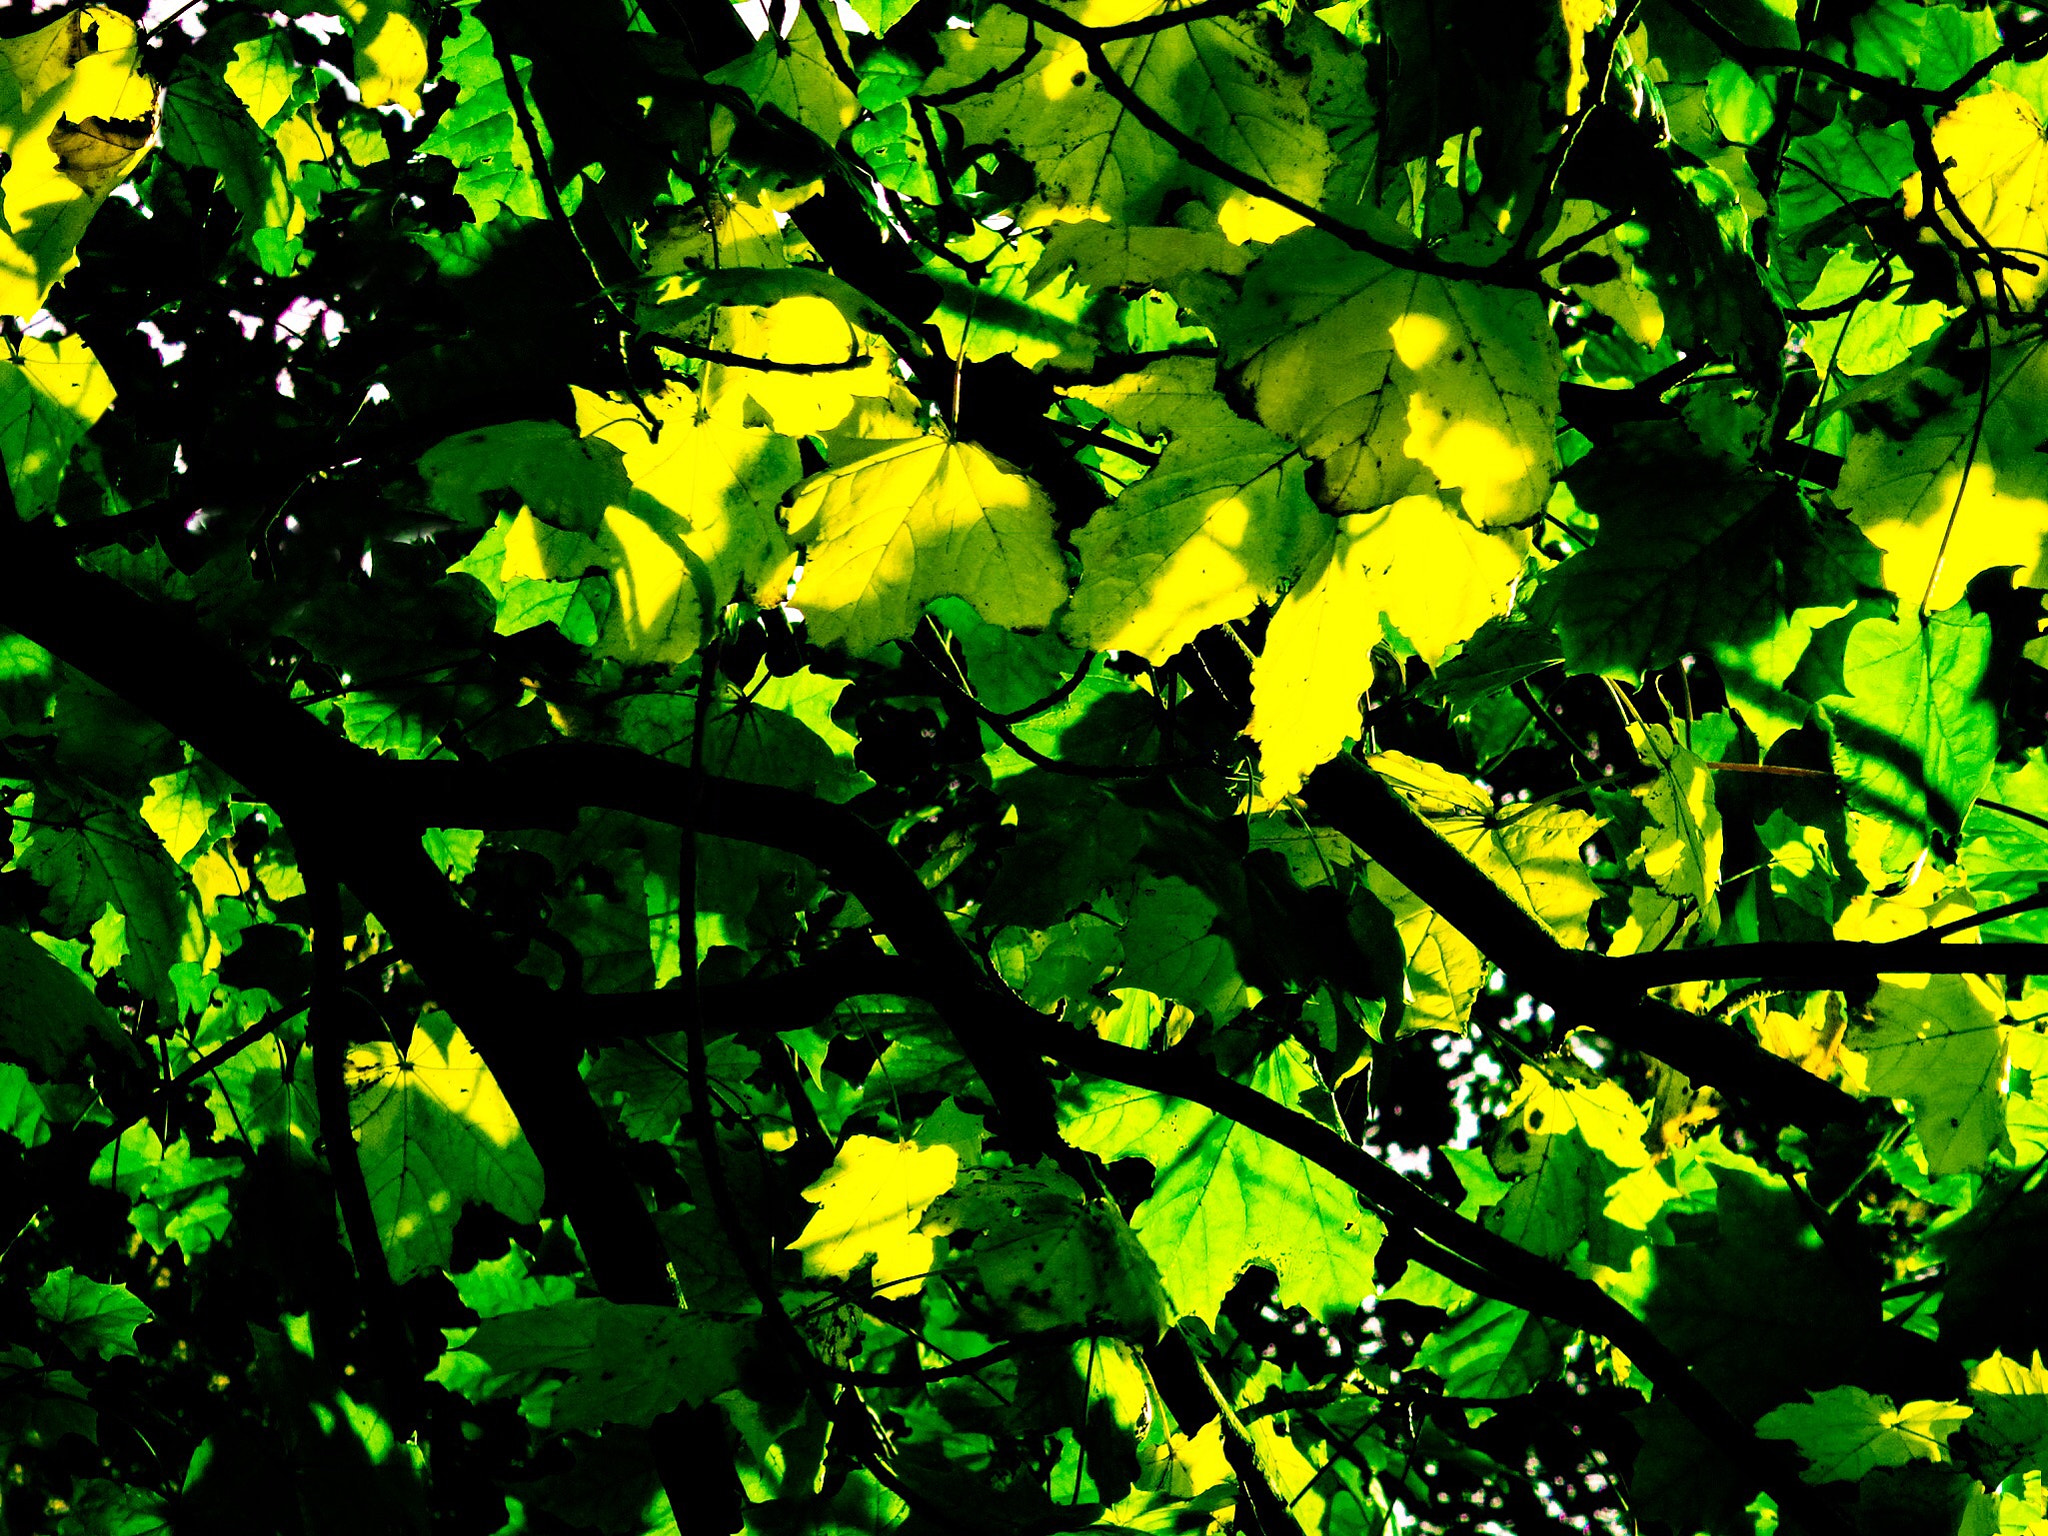 Sony Cyber-shot DSC-TX30 sample photo. Sunlight through green and yellow leaves photography